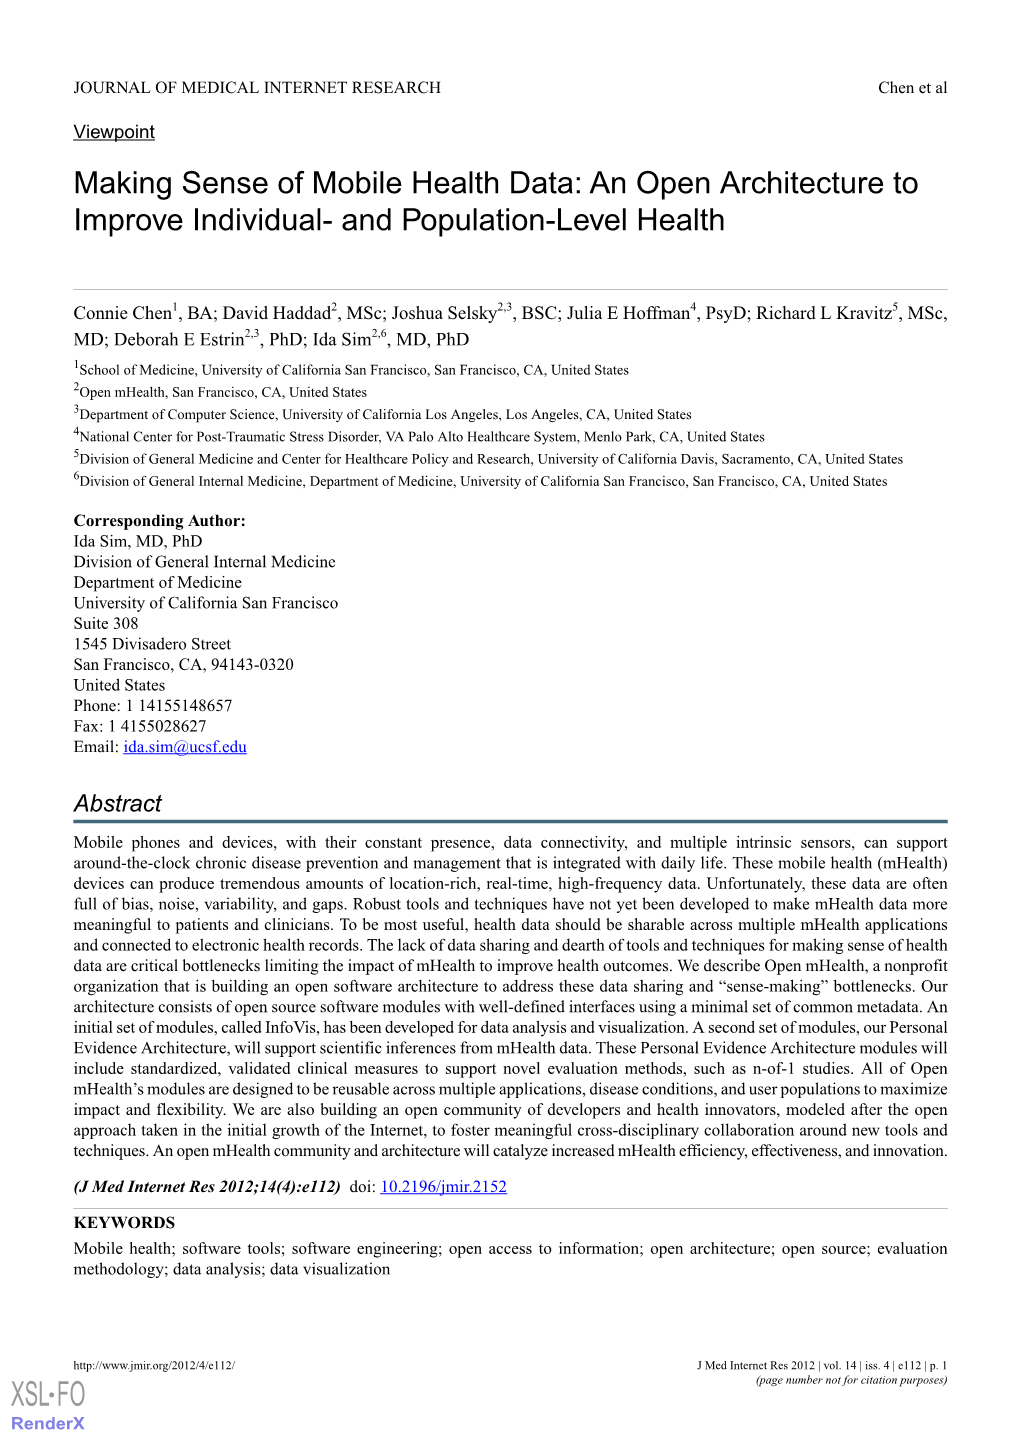 Making Sense of Mobile Health Data: an Open Architecture to Improve Individual- and Population-Level Health